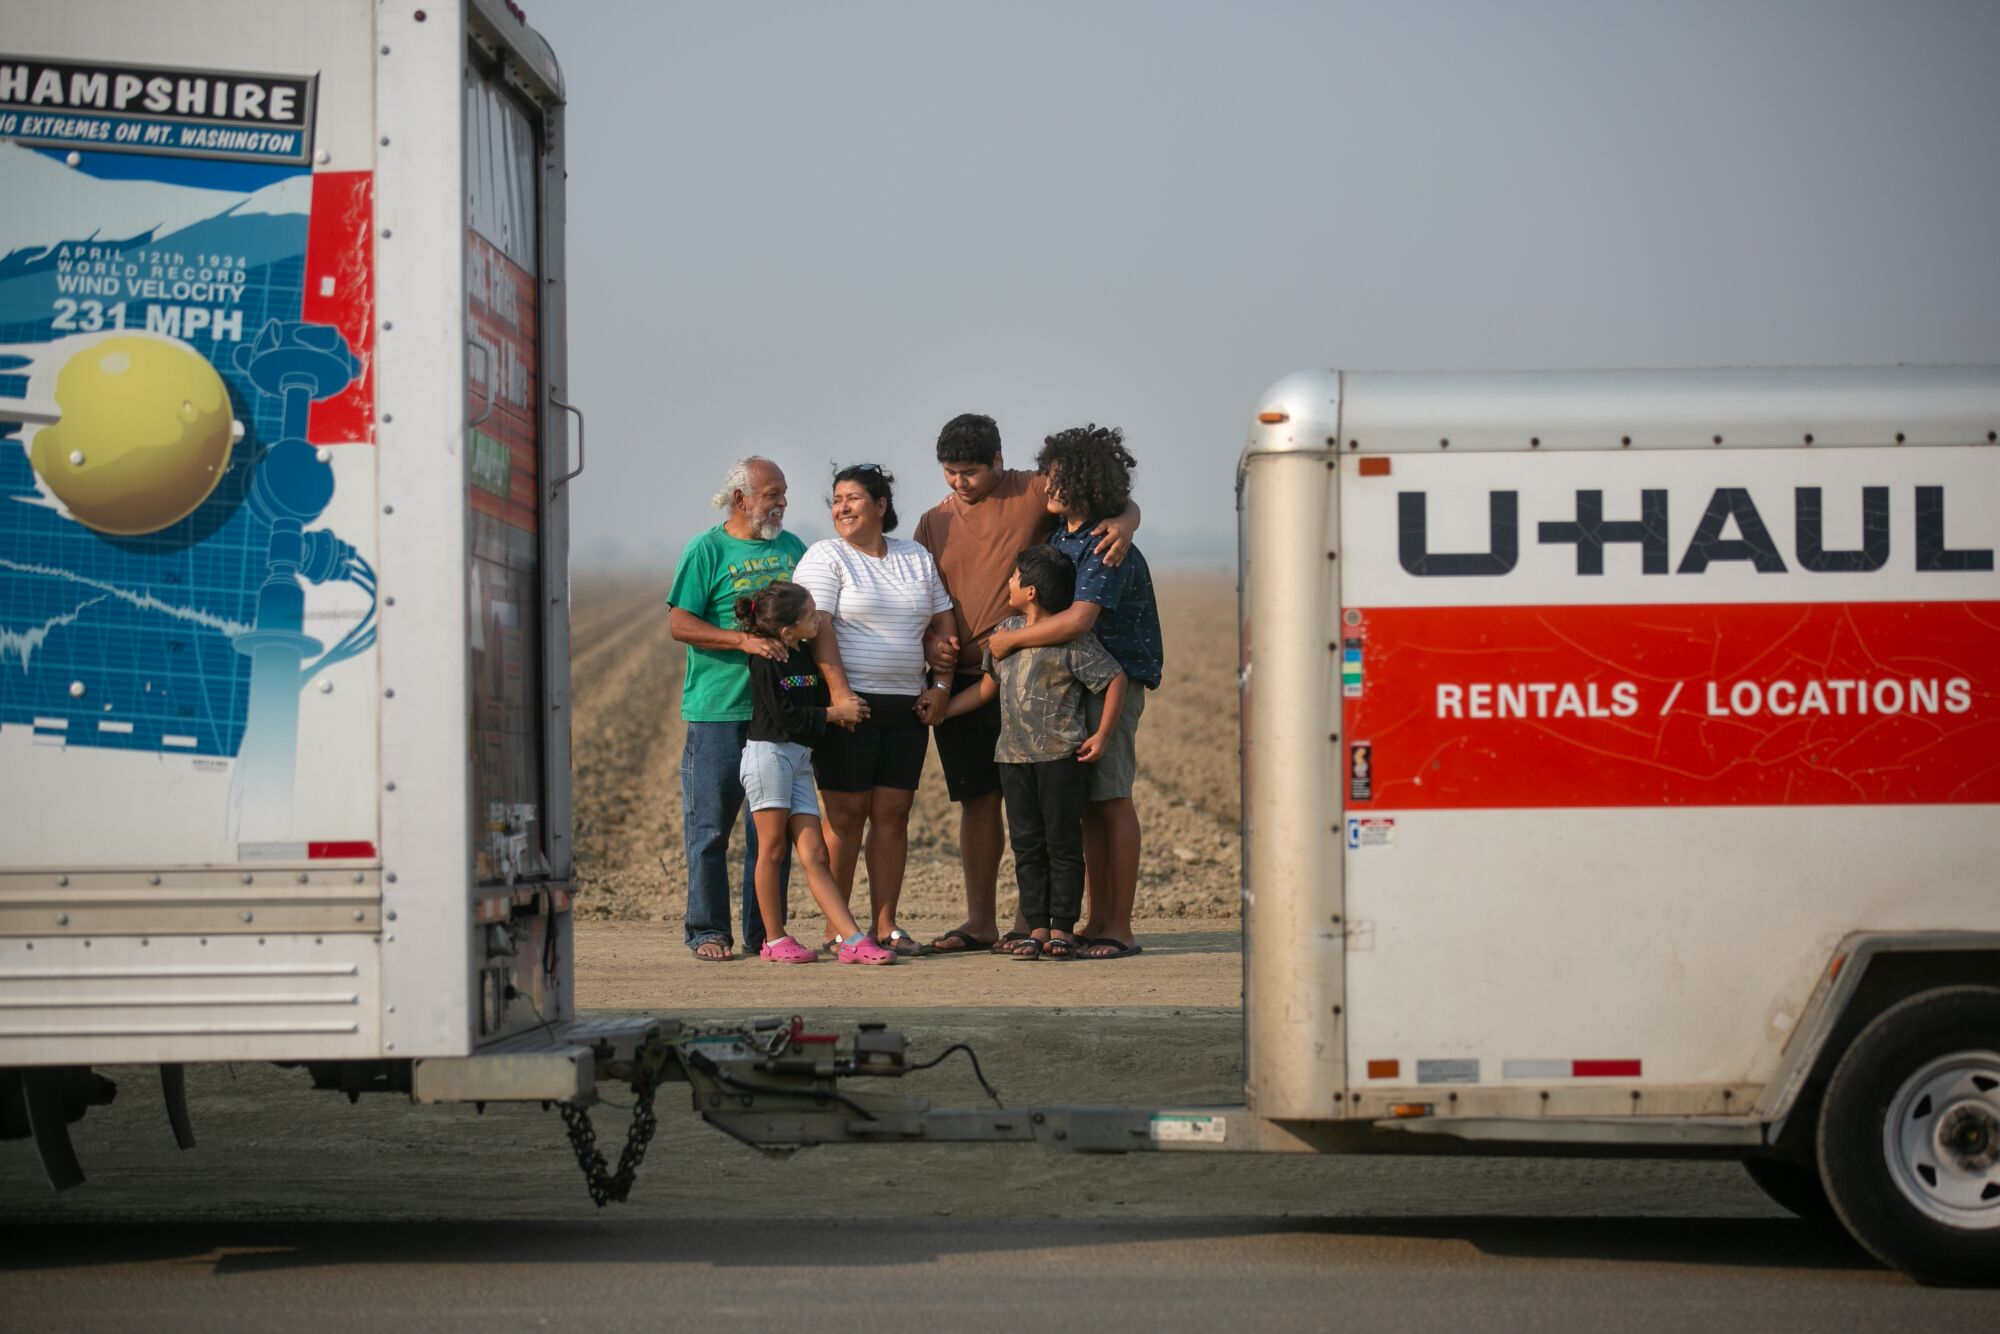 The family gathers for a photo by their U-Haul